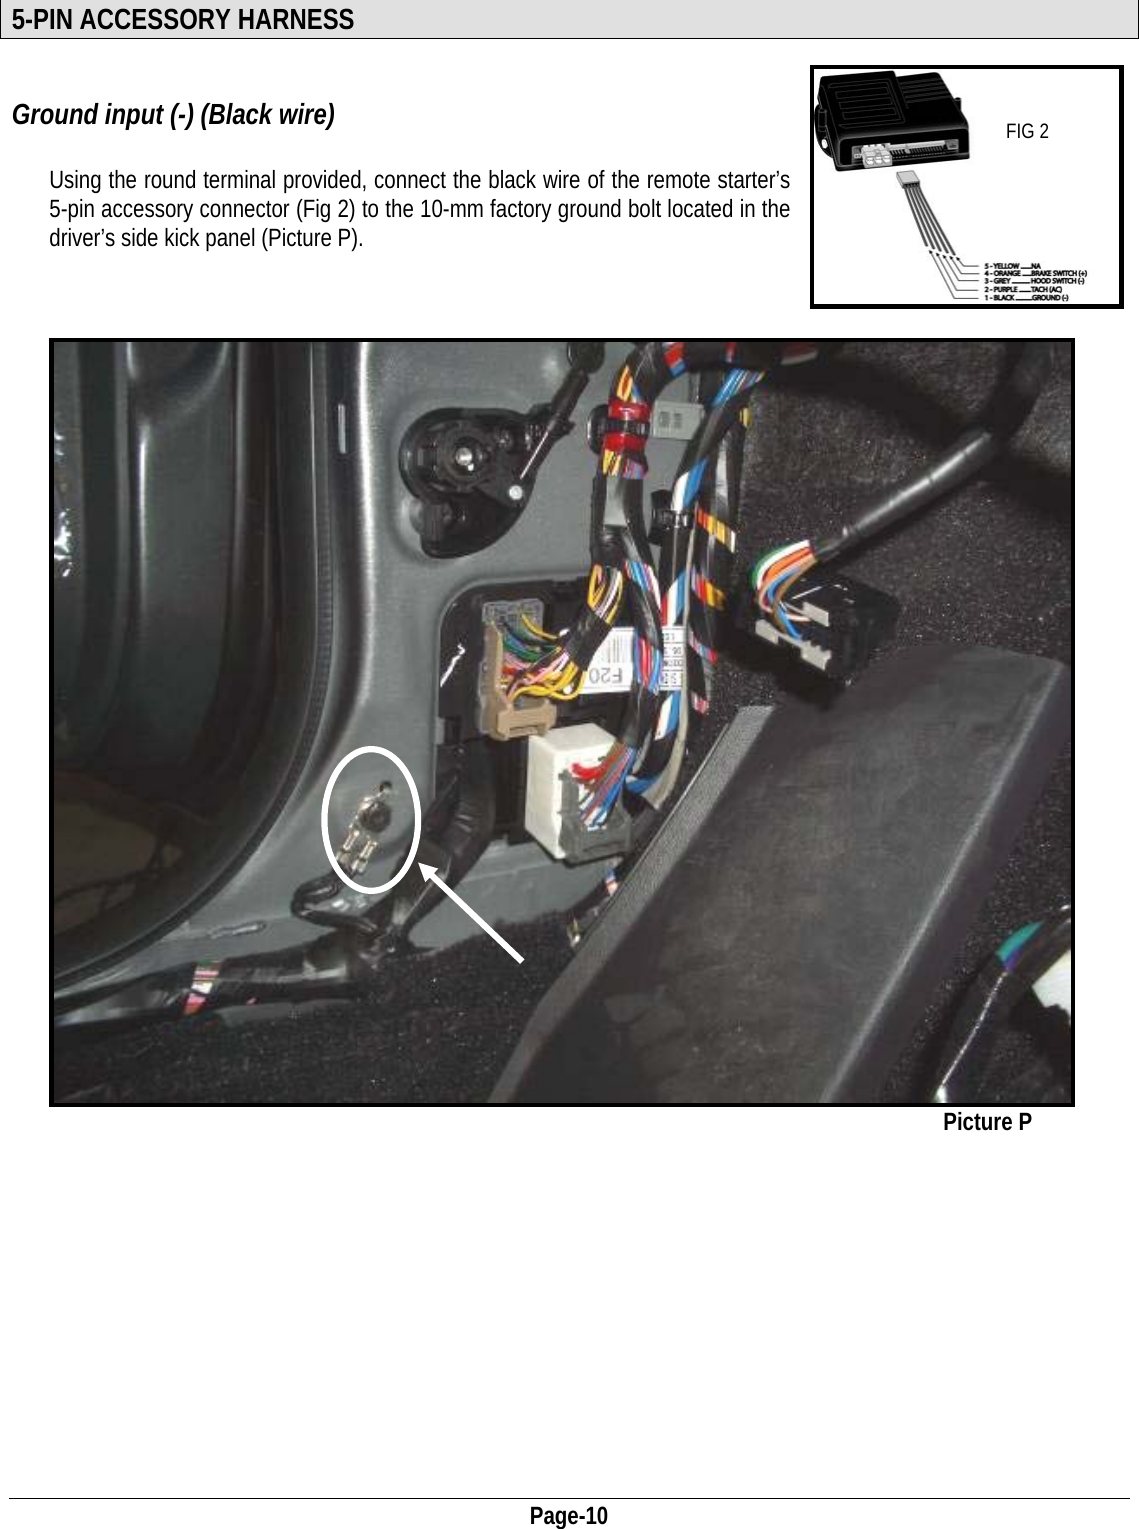  Page-10 5-PIN ACCESSORY HARNESS  Ground input (-) (Black wire)  FIG 2  Using the round terminal provided, connect the black wire of the remote starter’s 5-pin accessory connector (Fig 2) to the 10-mm factory ground bolt located in the driver’s side kick panel (Picture P).                                                                    Picture P             